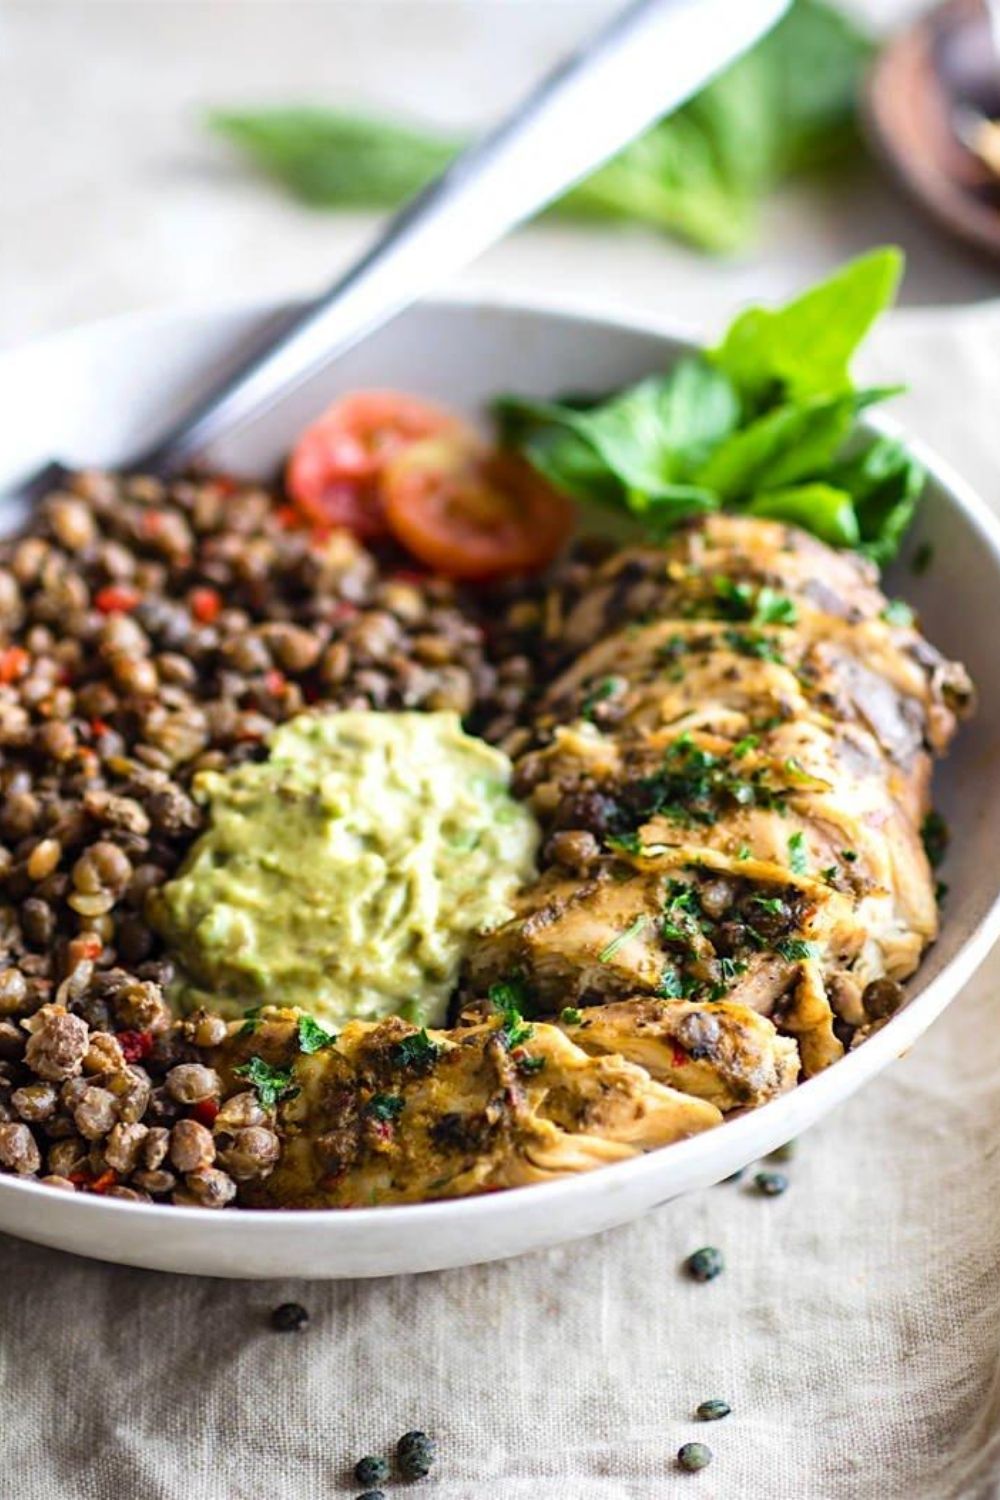 Simple Garlicky Green Crock-Pot Chicken And Lentils.